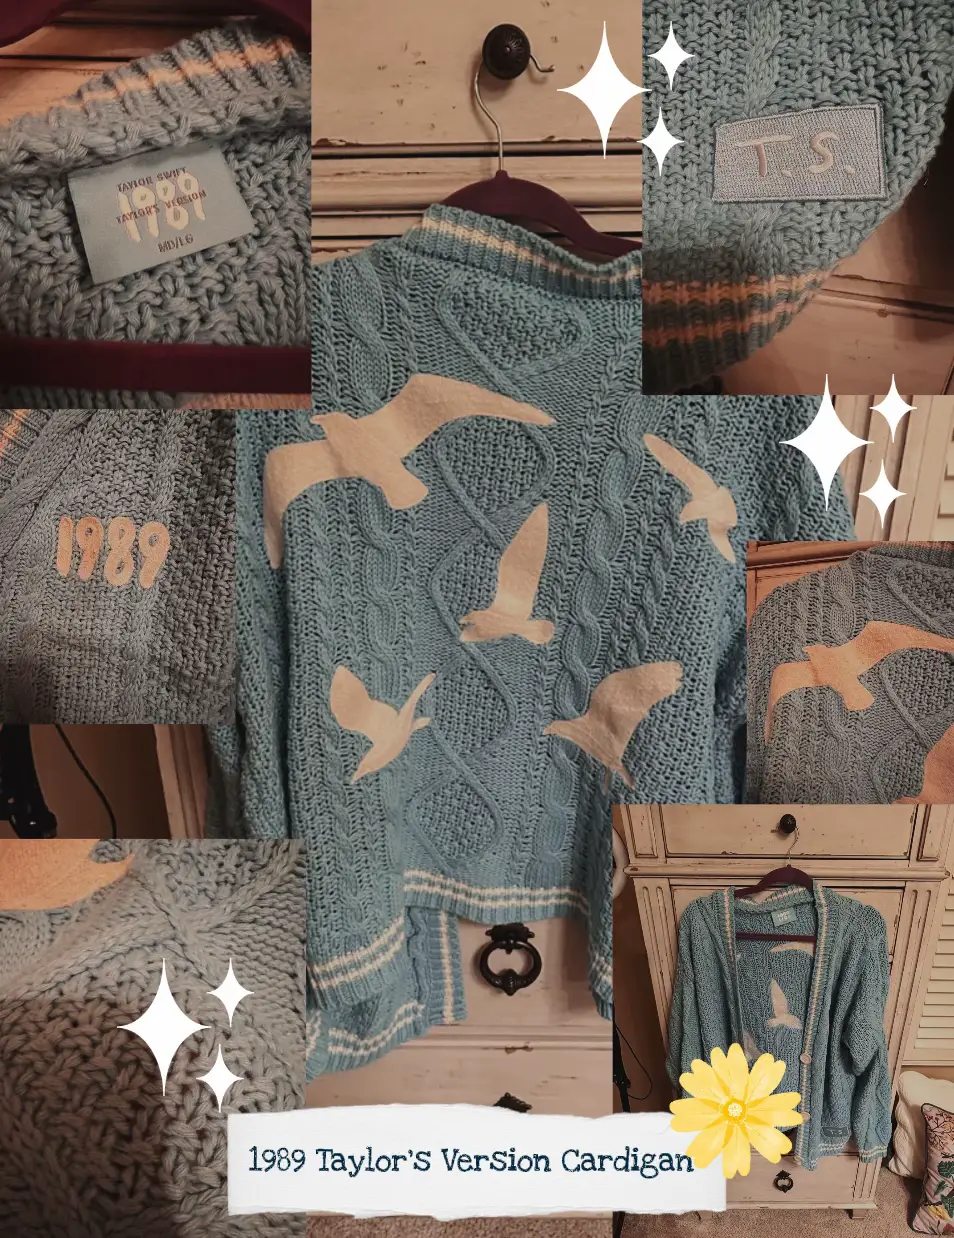 1989 Taylor's Version Cardigan | Gallery posted by Savannahs_style